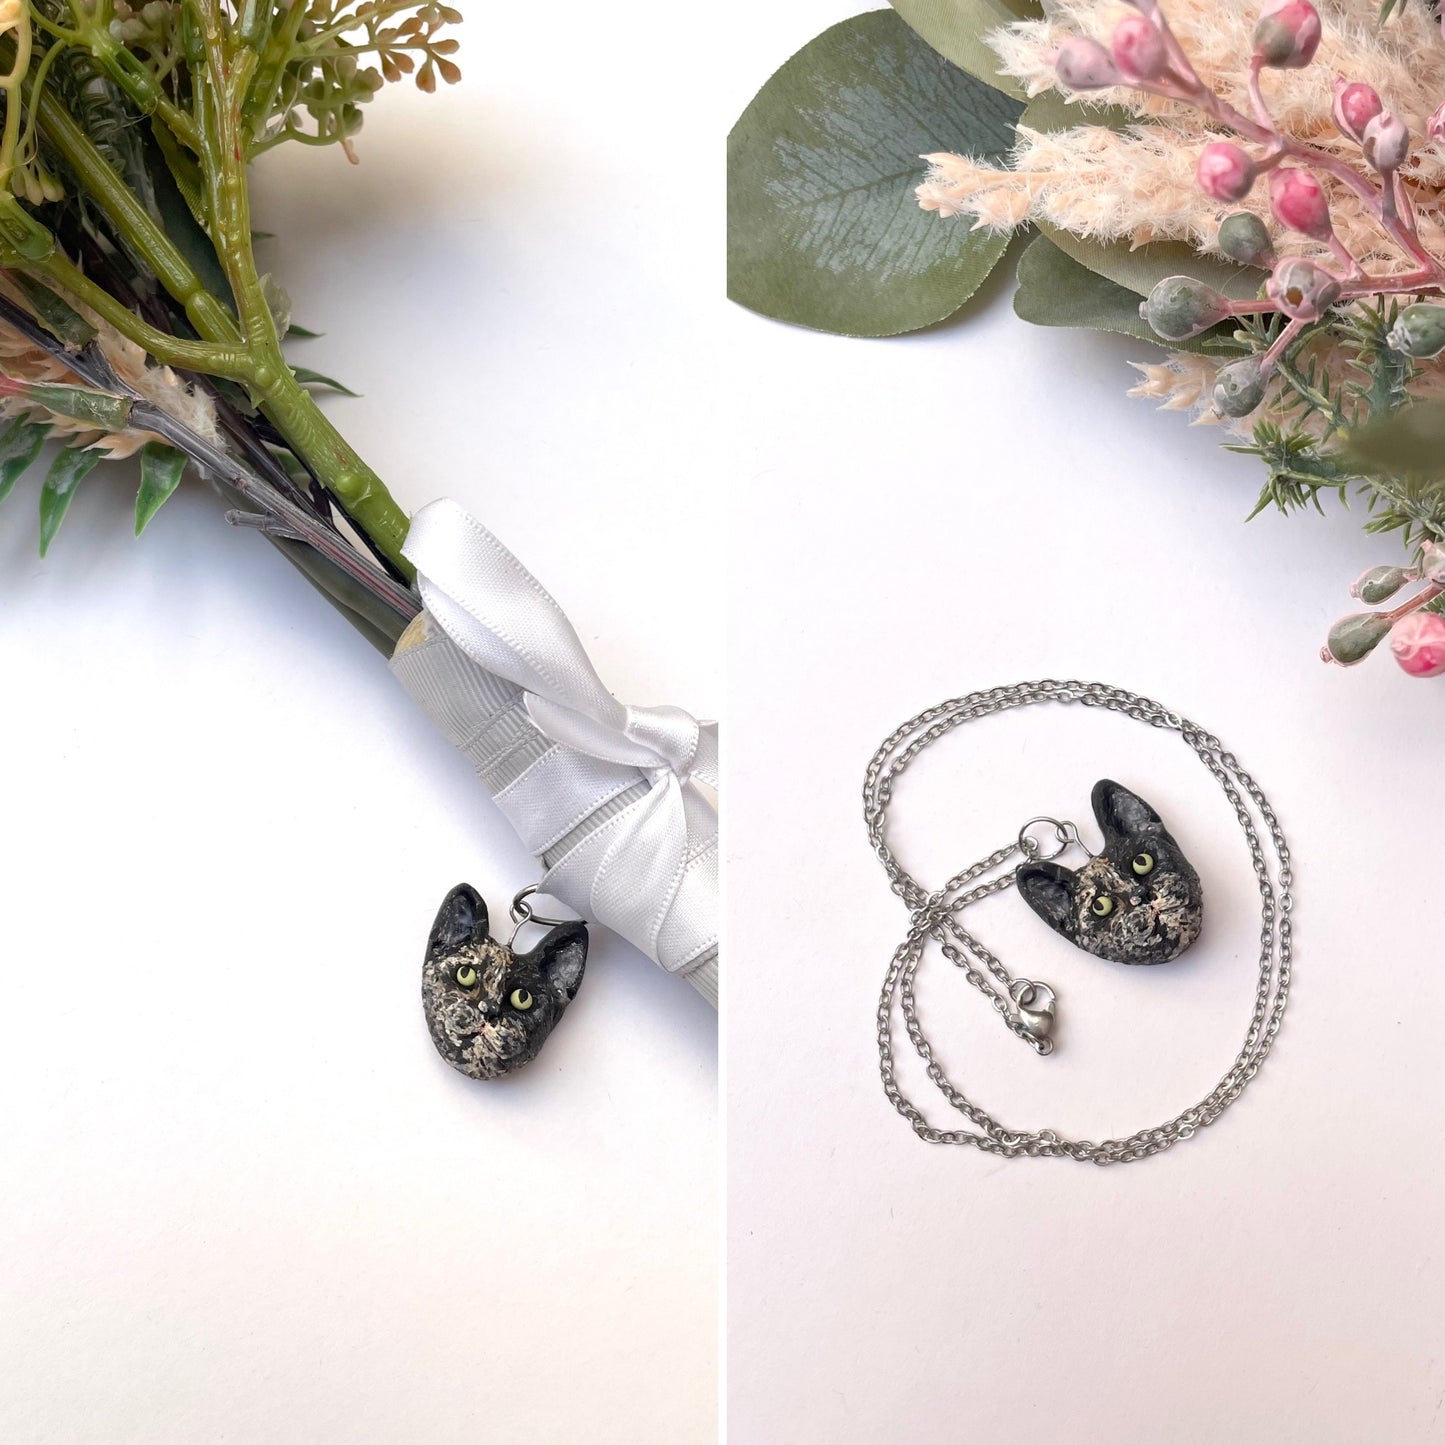 Demostration of how a custom pet bouquet charm can be used as a necklace pendant also.